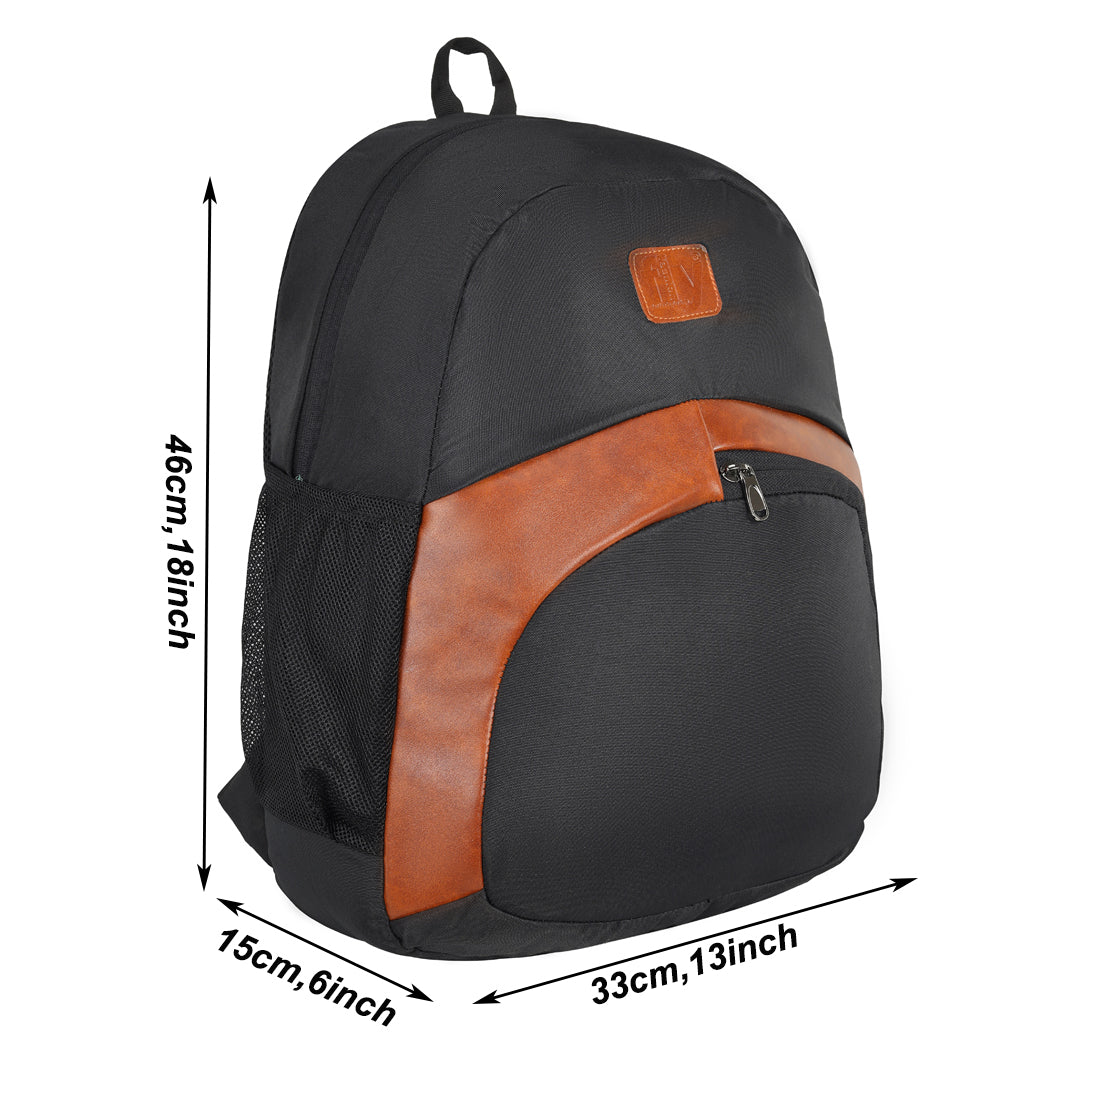 Fly Fashion Polyester Water Repellent Casual College Backpack for Laptop Bag up to 15.6 inch Men and Women